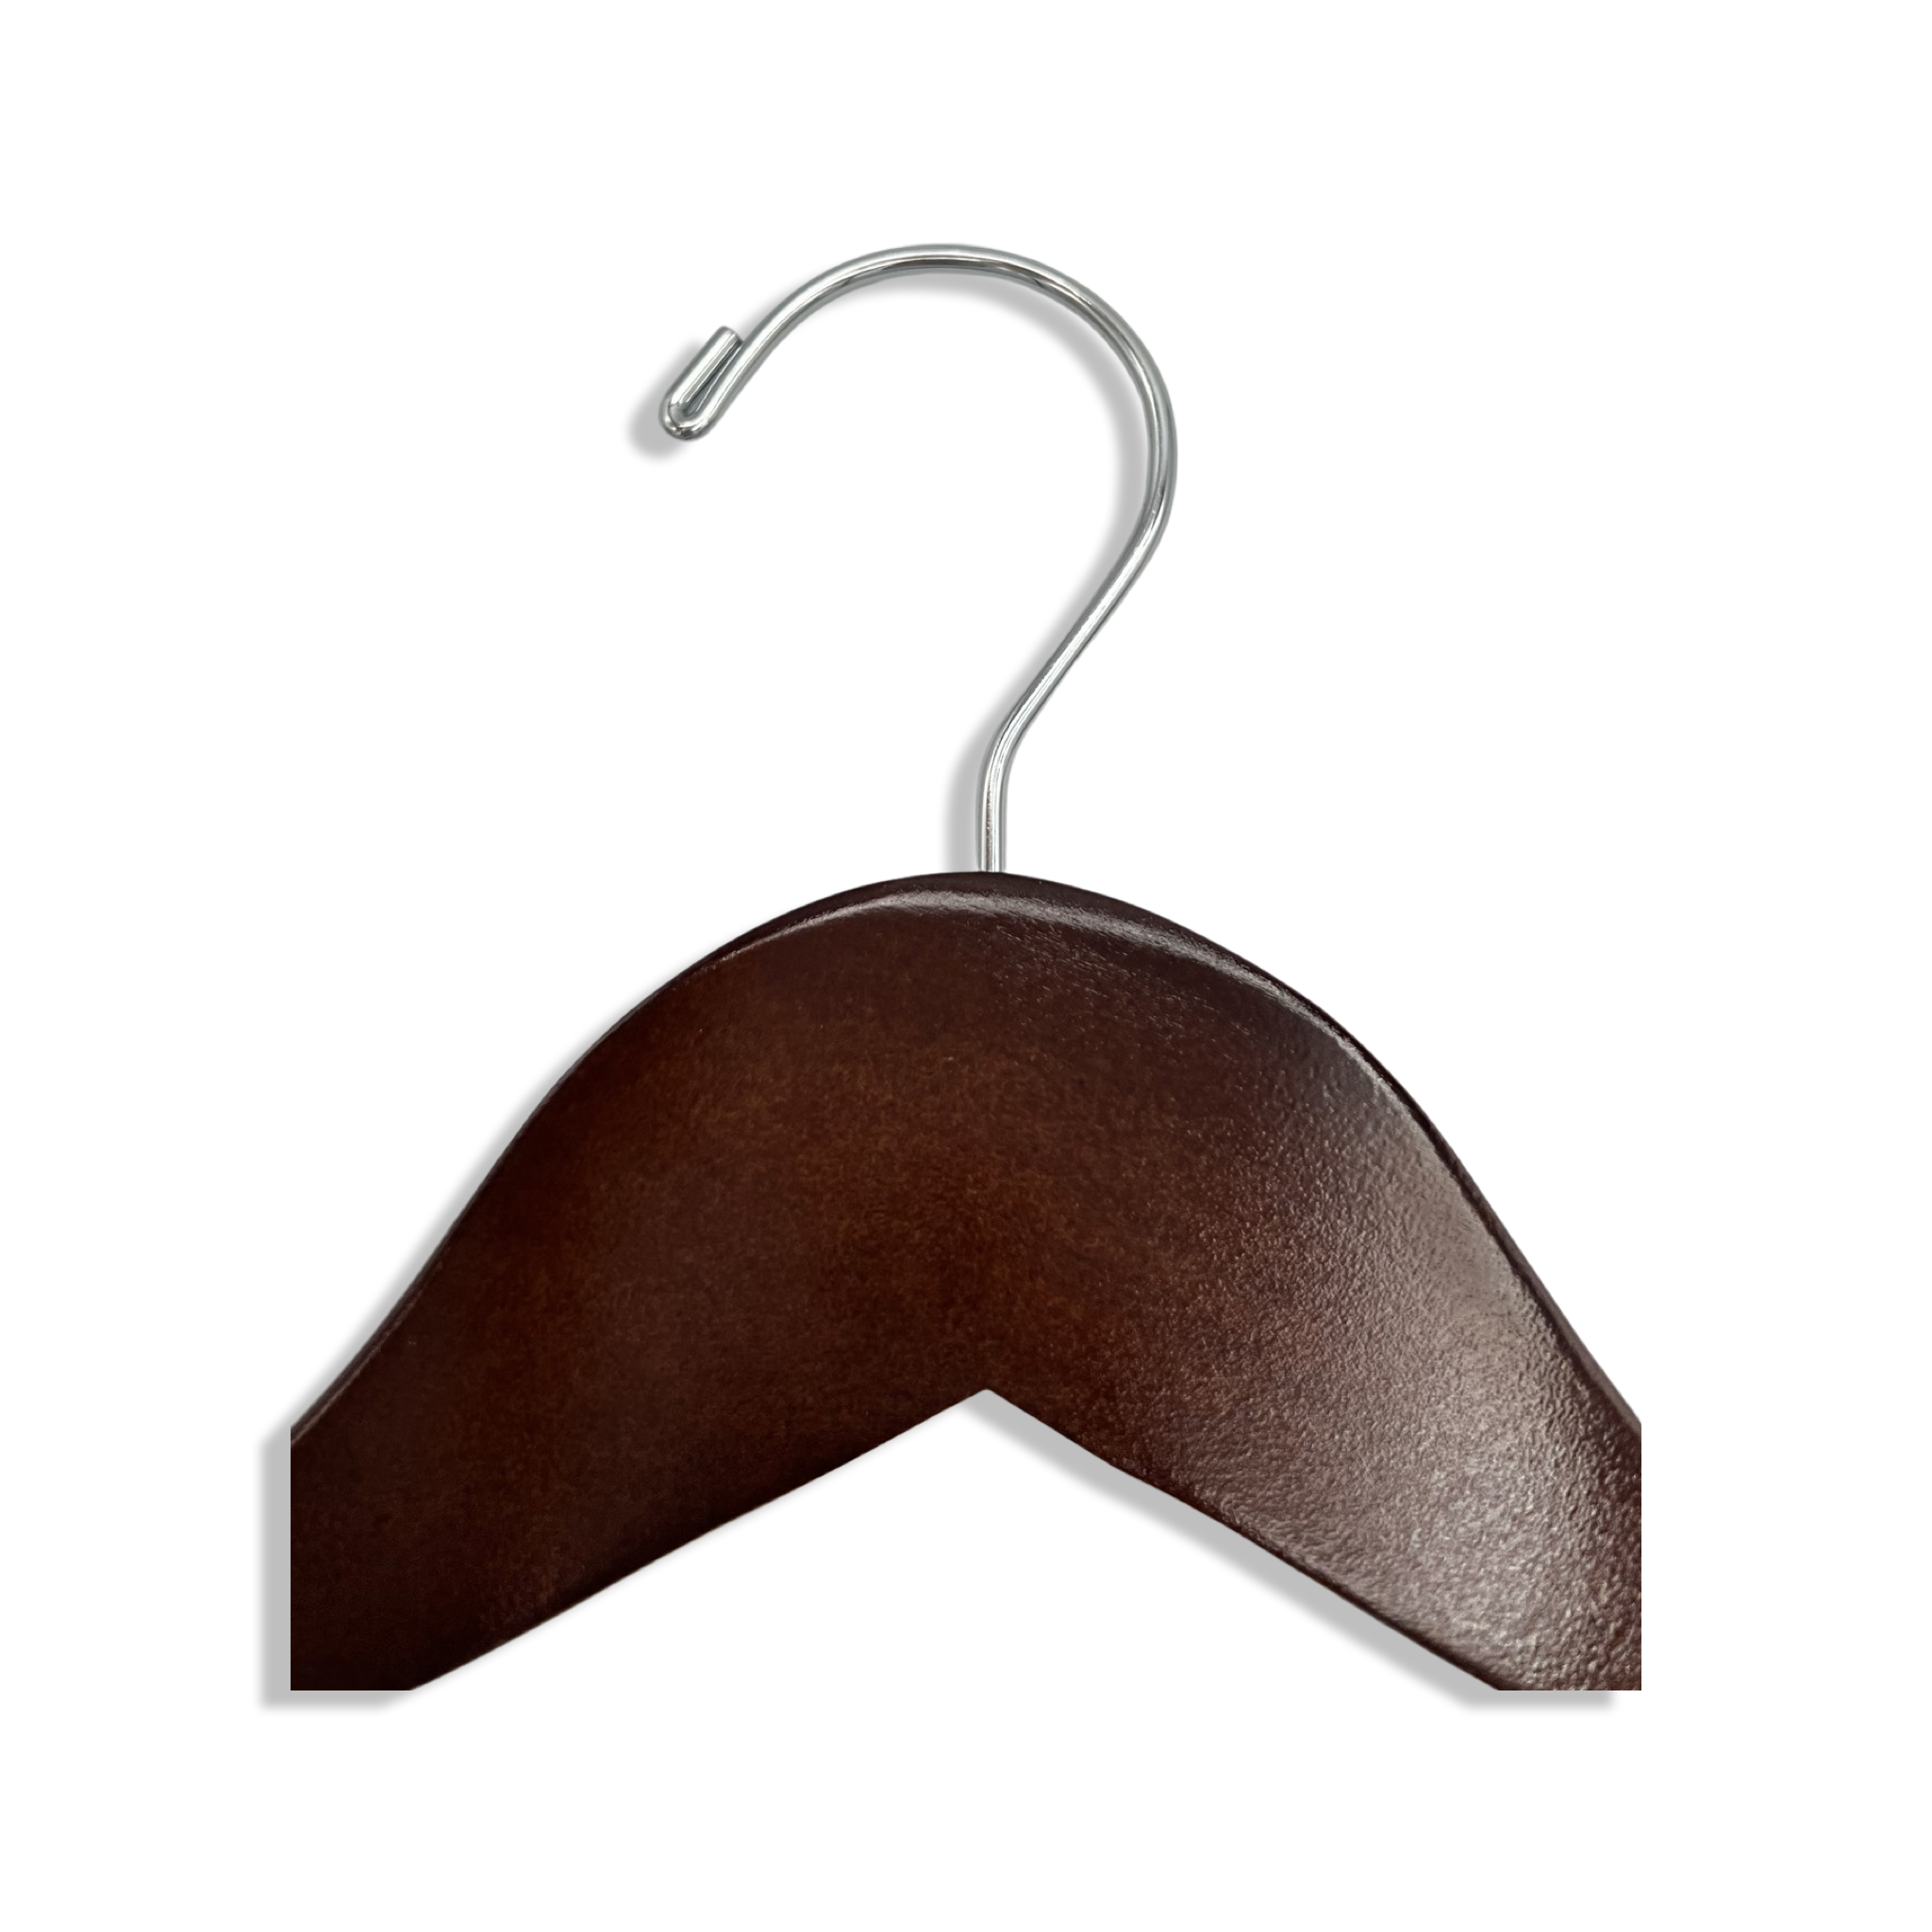 Top of a Standard Grade Dark Walnut Adult Wood Clothes Hanger with a silver hook facing to the left